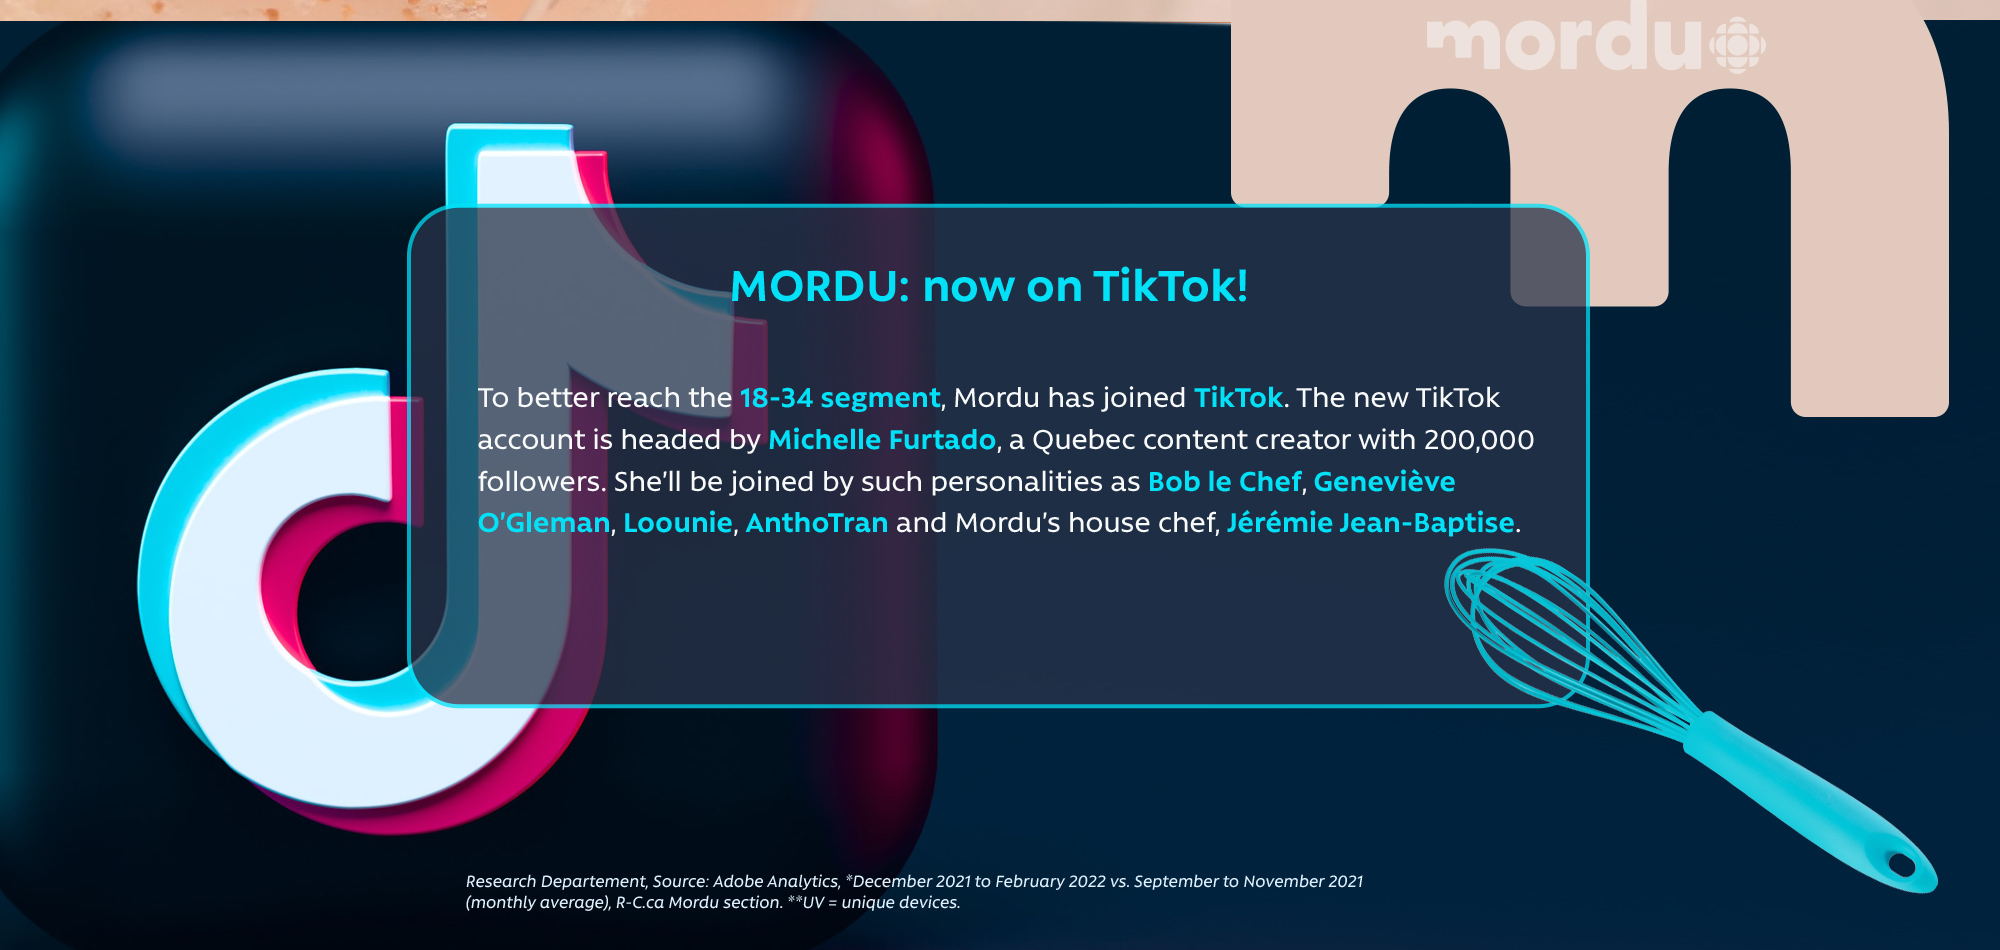 MORDU: now on TikTok! To better reach the 18-34 segment, Mordu has joined TikTok. The new TikTok account is headed by Michelle Furtado, a Quebec content creator with 200,000 followers. She'll be joined by such personalities as Bob le Chef, Geneviève O'Gleman, Loounie, AnthoTran and Mordu's house chef, Jérémie Jean-Baptise.